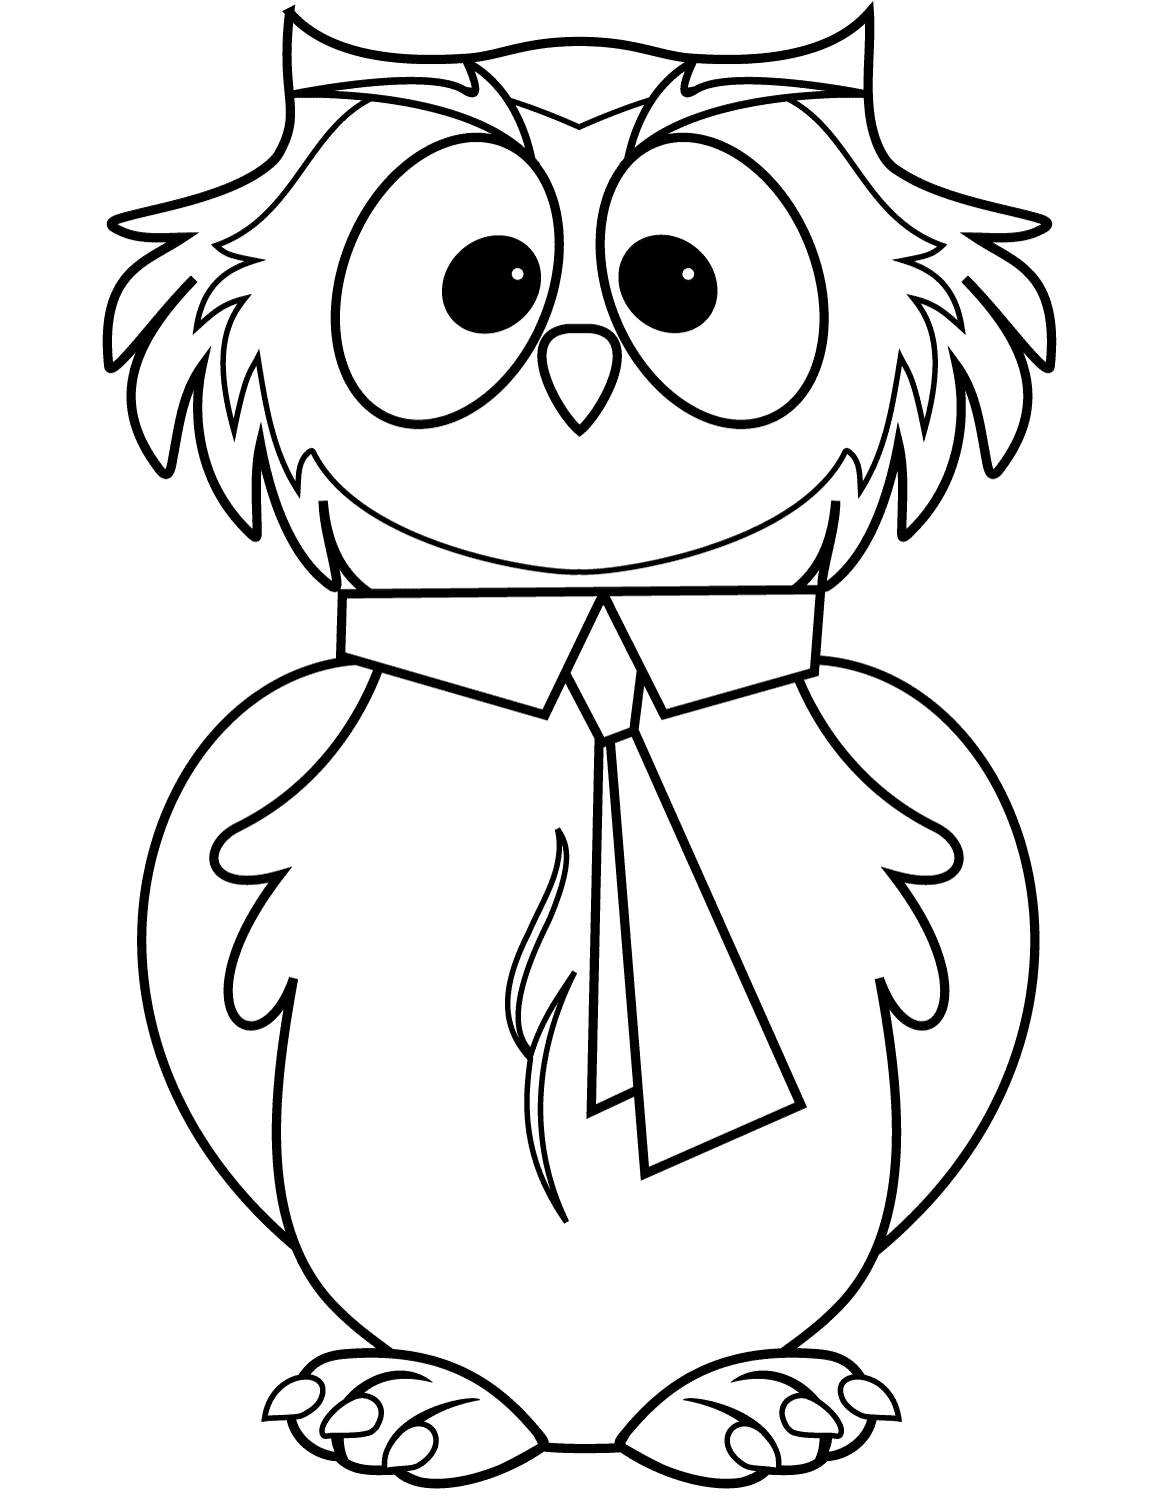 Cartoon Owl with Tie from Owl